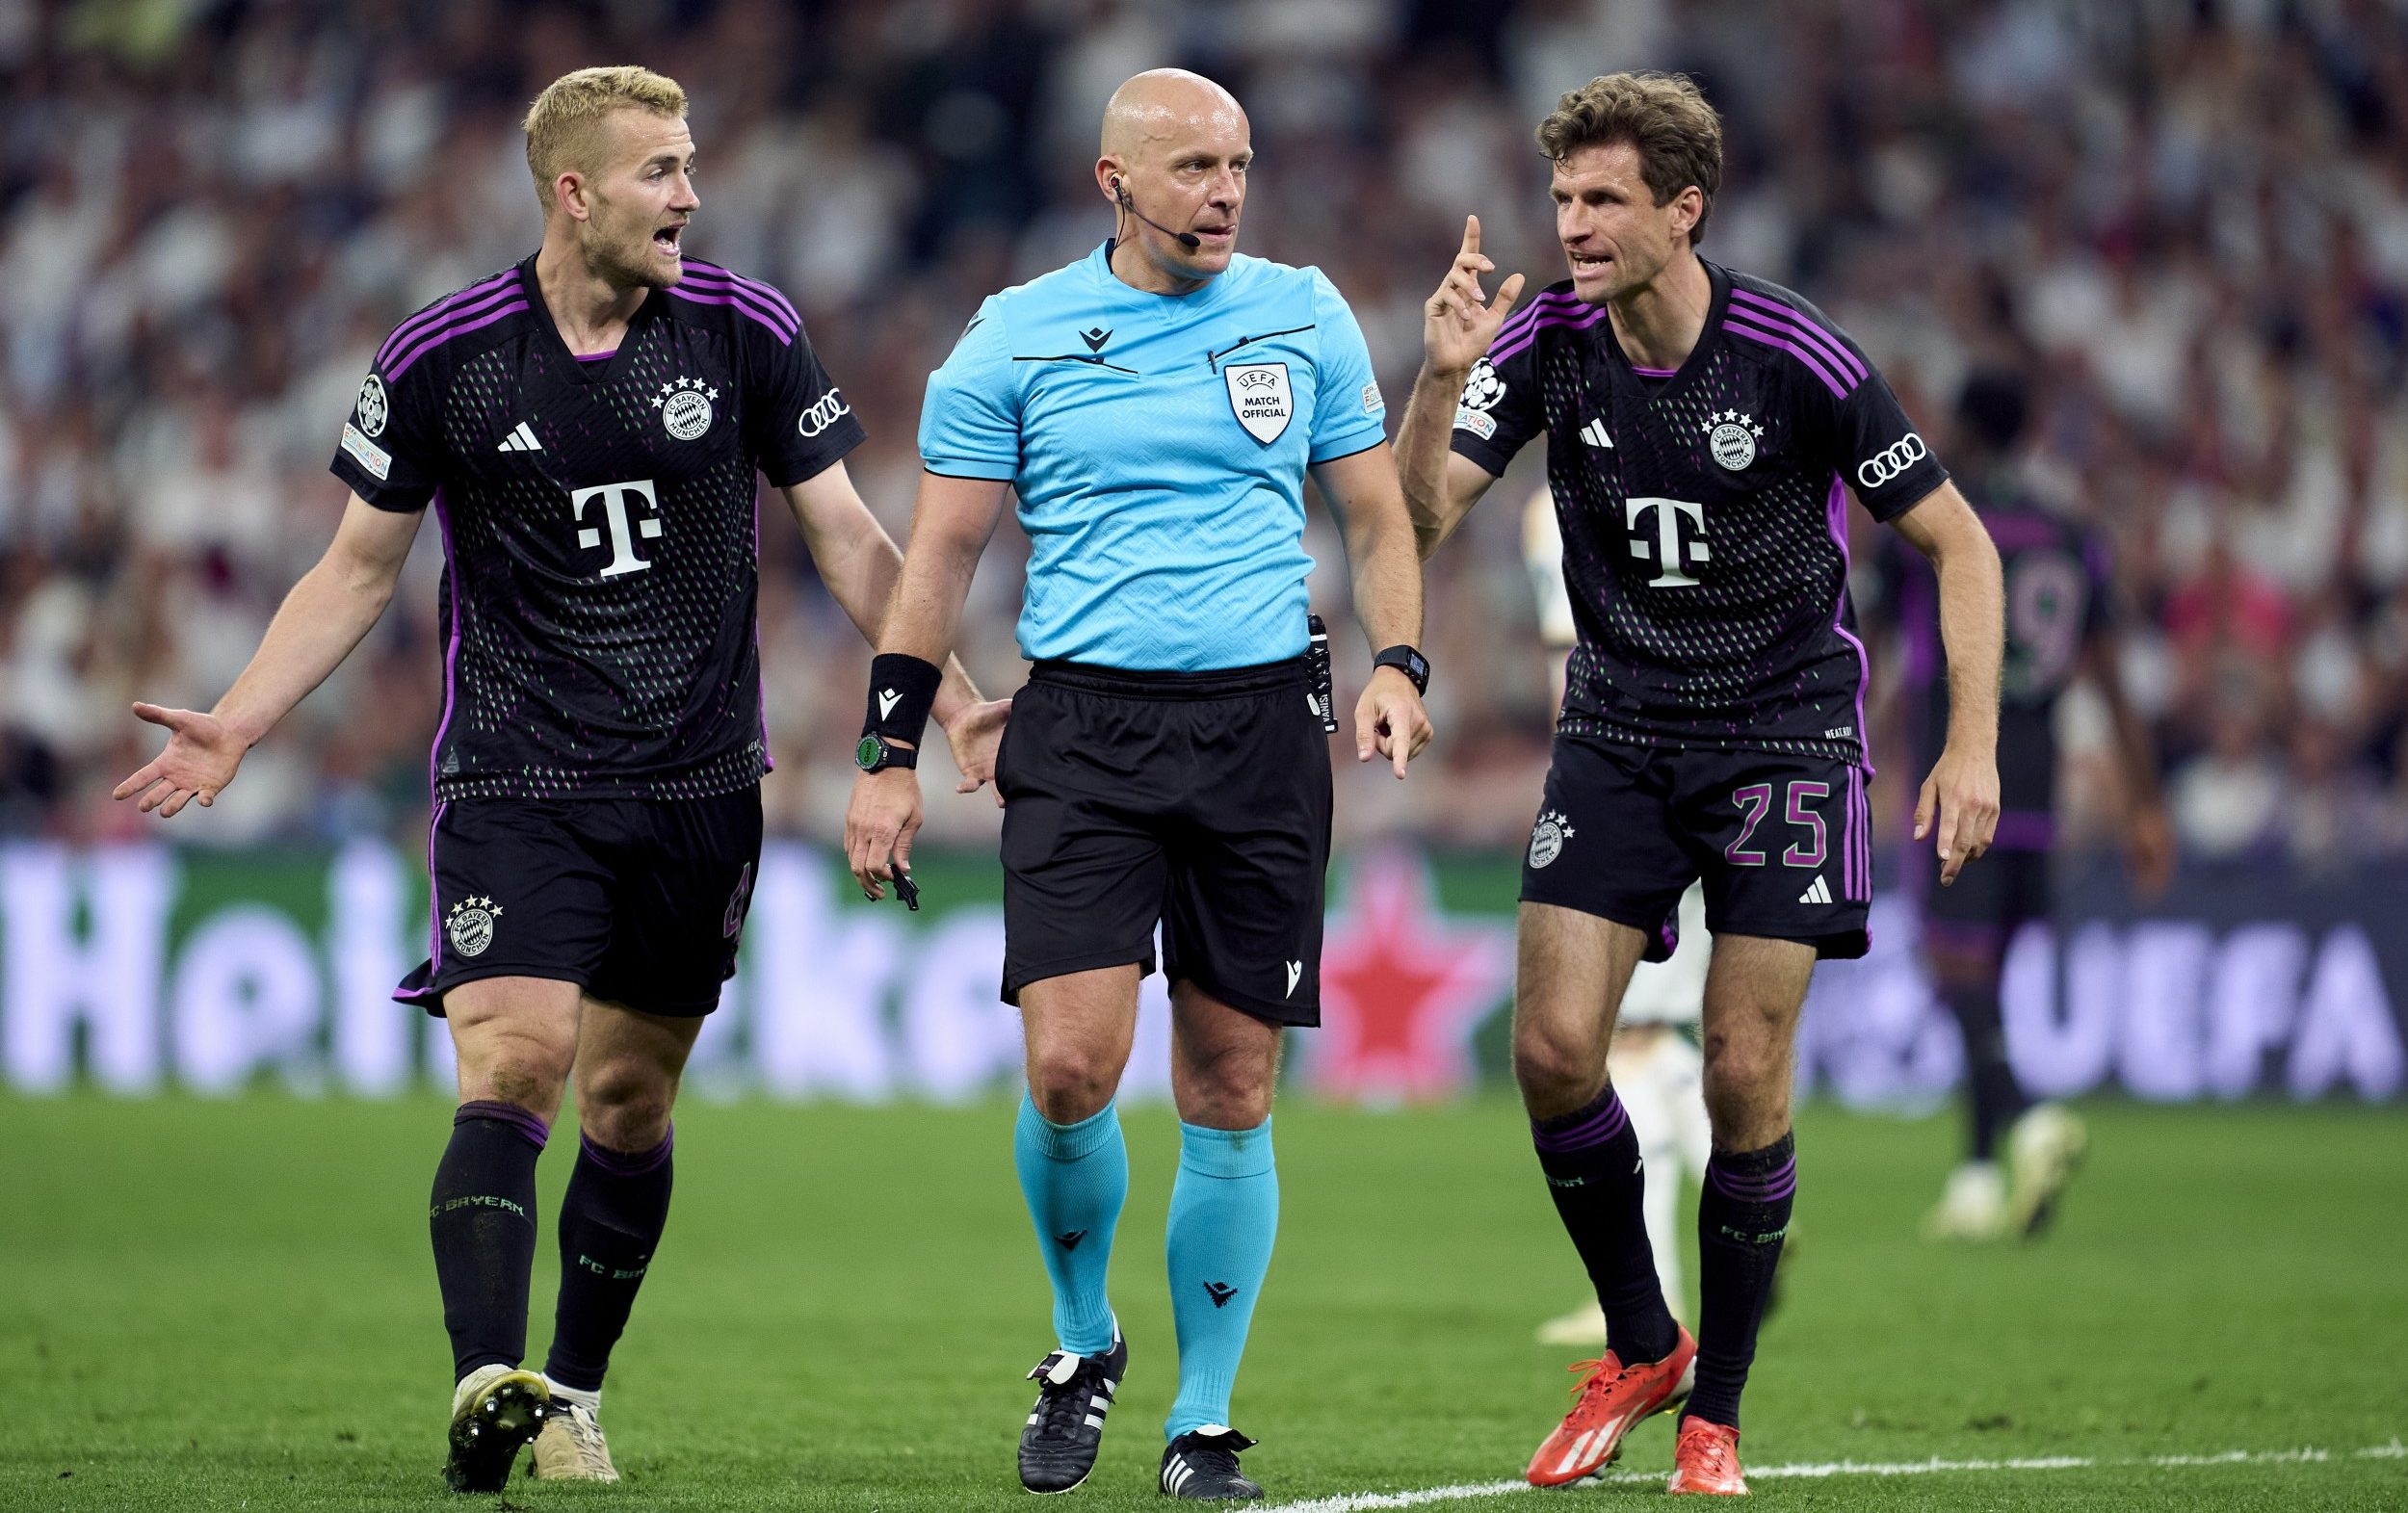 thomas tuchel blasts officials after ‘disastrous’ offside decision costs bayern munich dearly